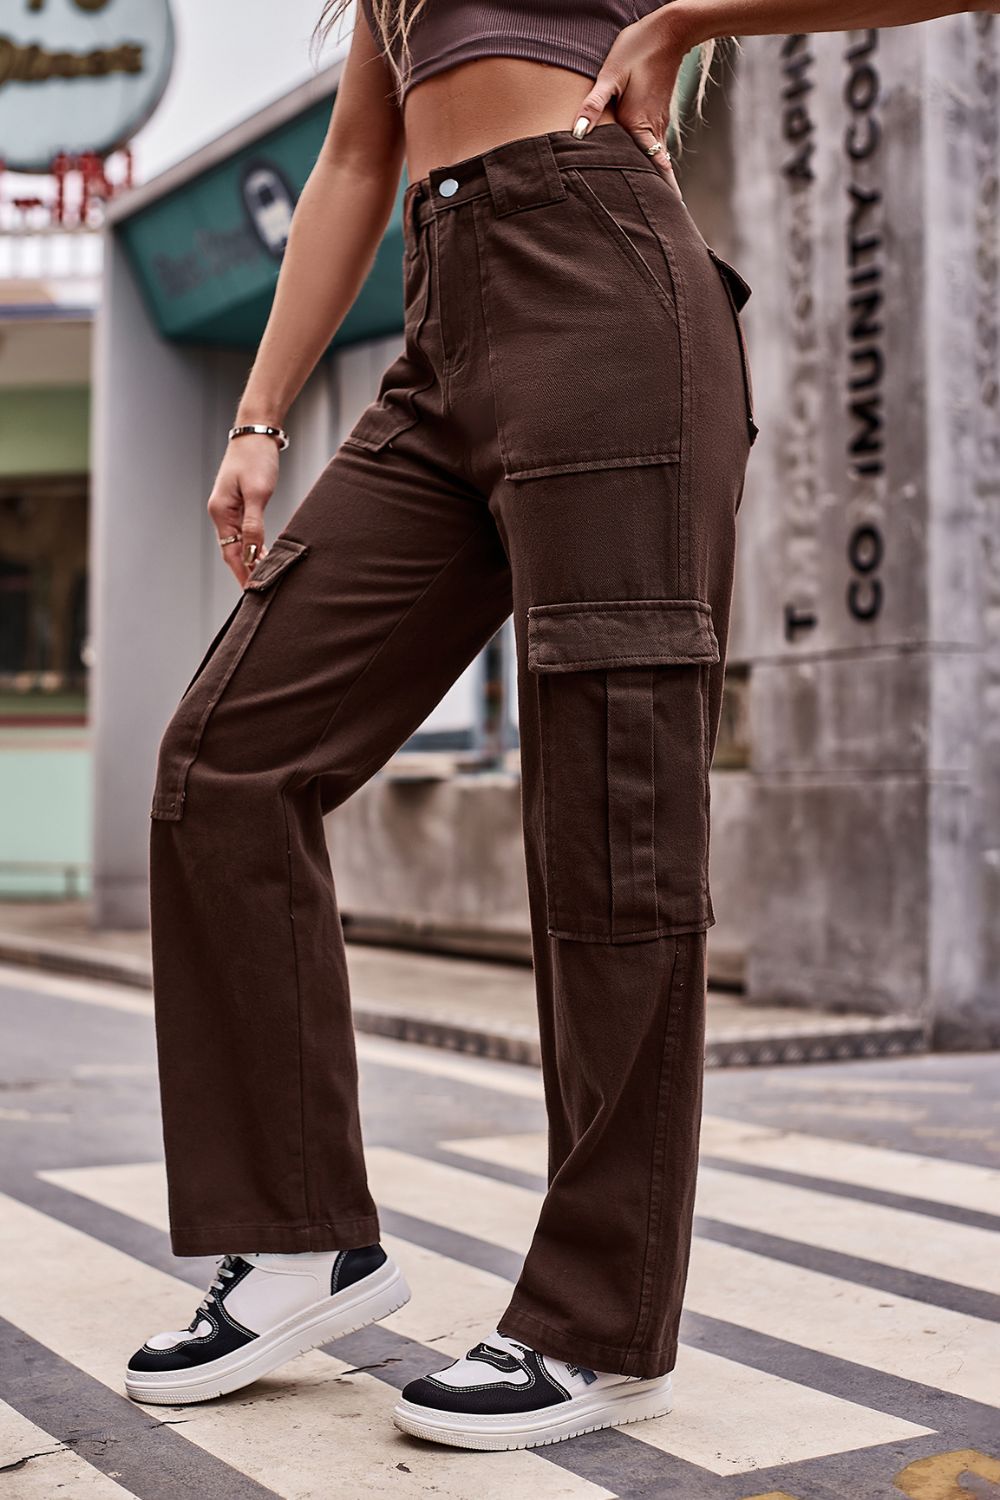 Buttoned High Waist Loose Fit Jeans Pants